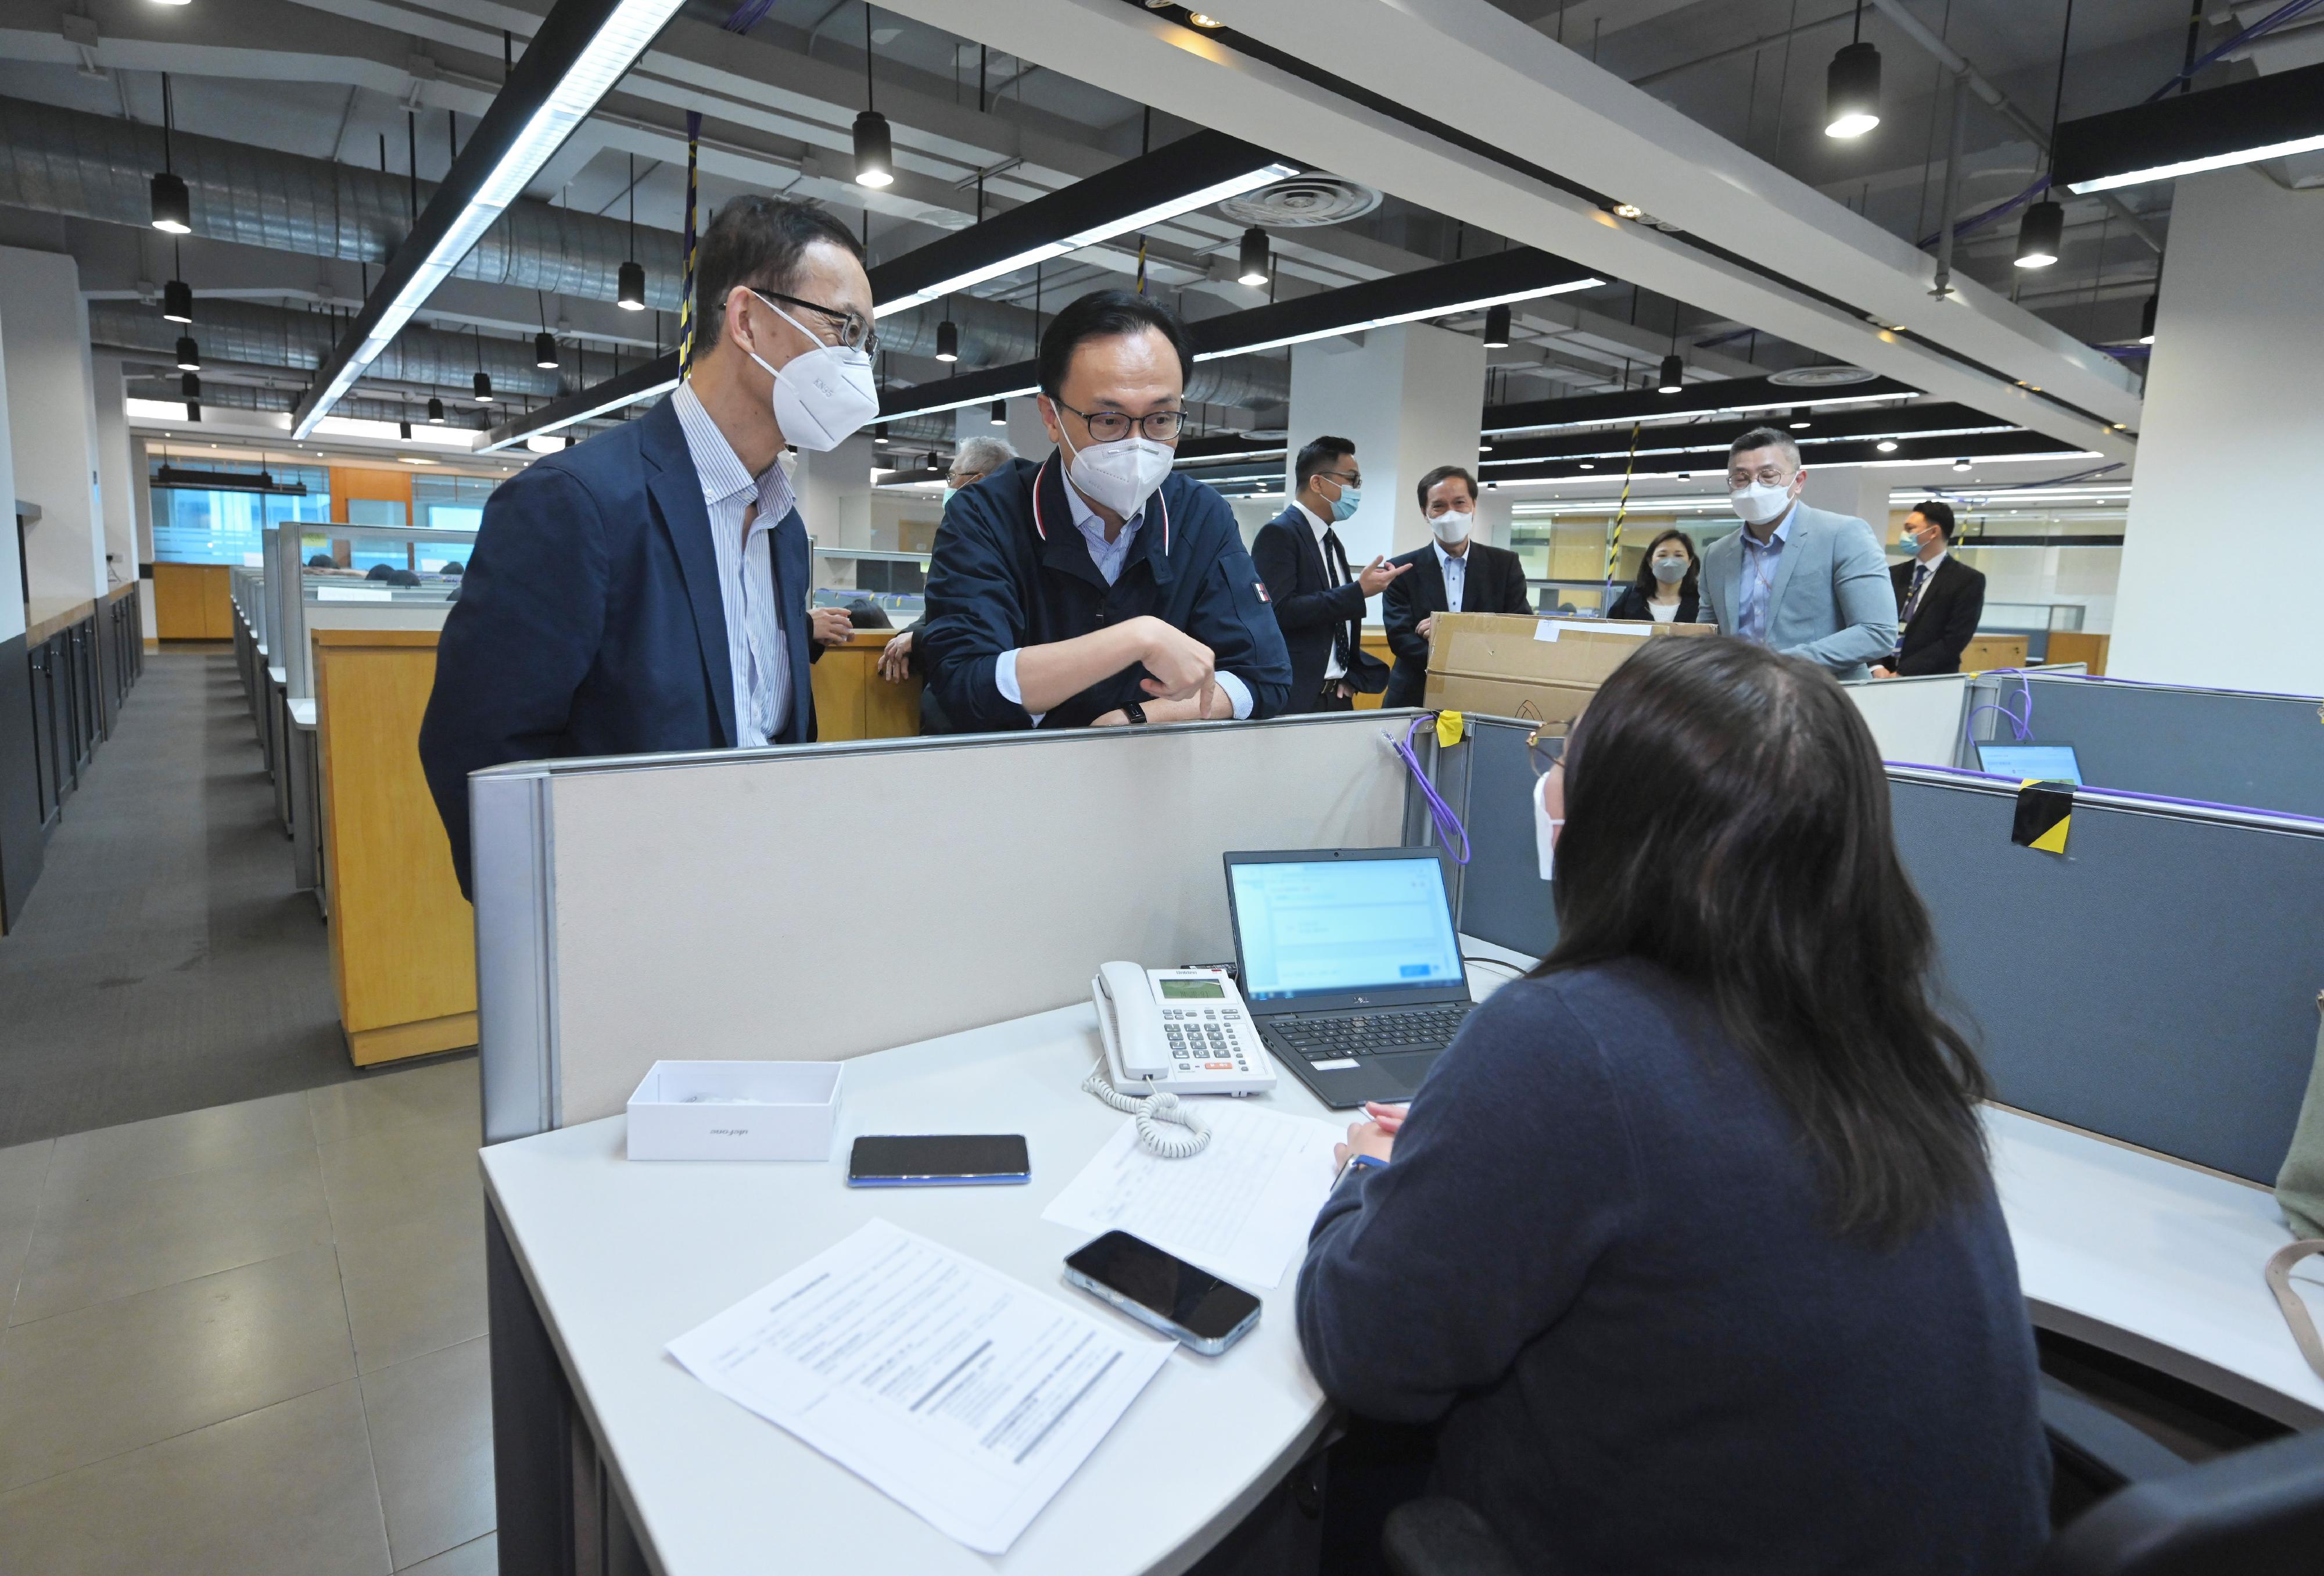 The Home Vaccination Service is open for online and phone registration starting from today (April 19). The Secretary for the Civil Service, Mr Patrick Nip, visited the call centre at the Hong Kong Spinners Industrial Building in Cheung Sha Wan to view the first-day operation of the centre. Photo shows Mr Nip (second left) talking to a student of the Caritas Institute of Higher Education who is assisting members of the public to register for the Home Vaccination Service at the call centre.